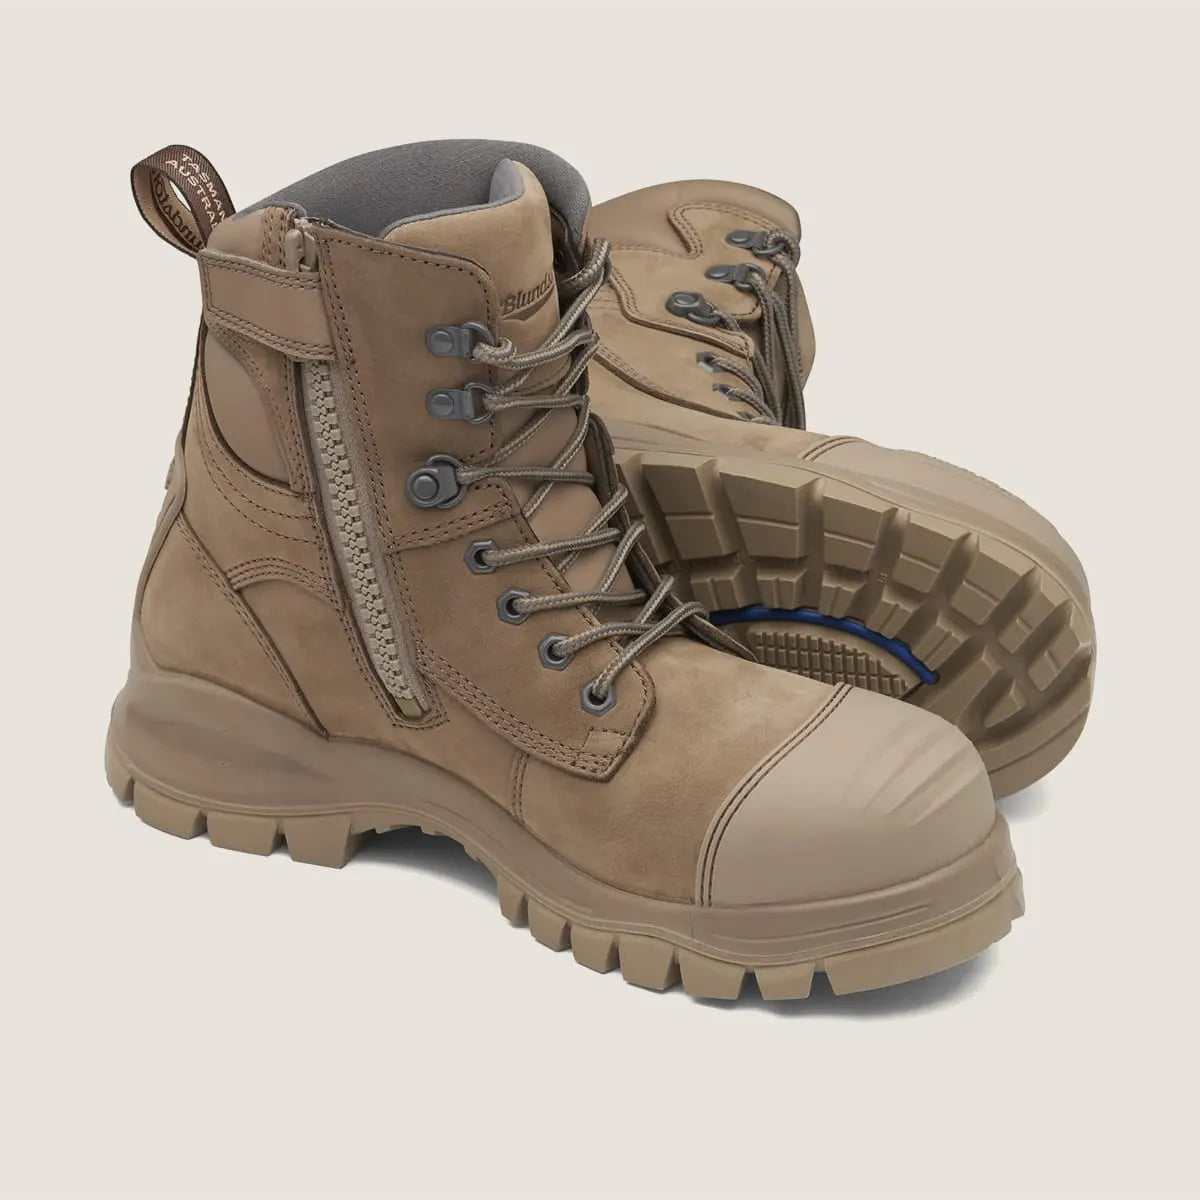 BLUNDSTONE 984 ZIP SIDE SAFETY BOOT-STONE